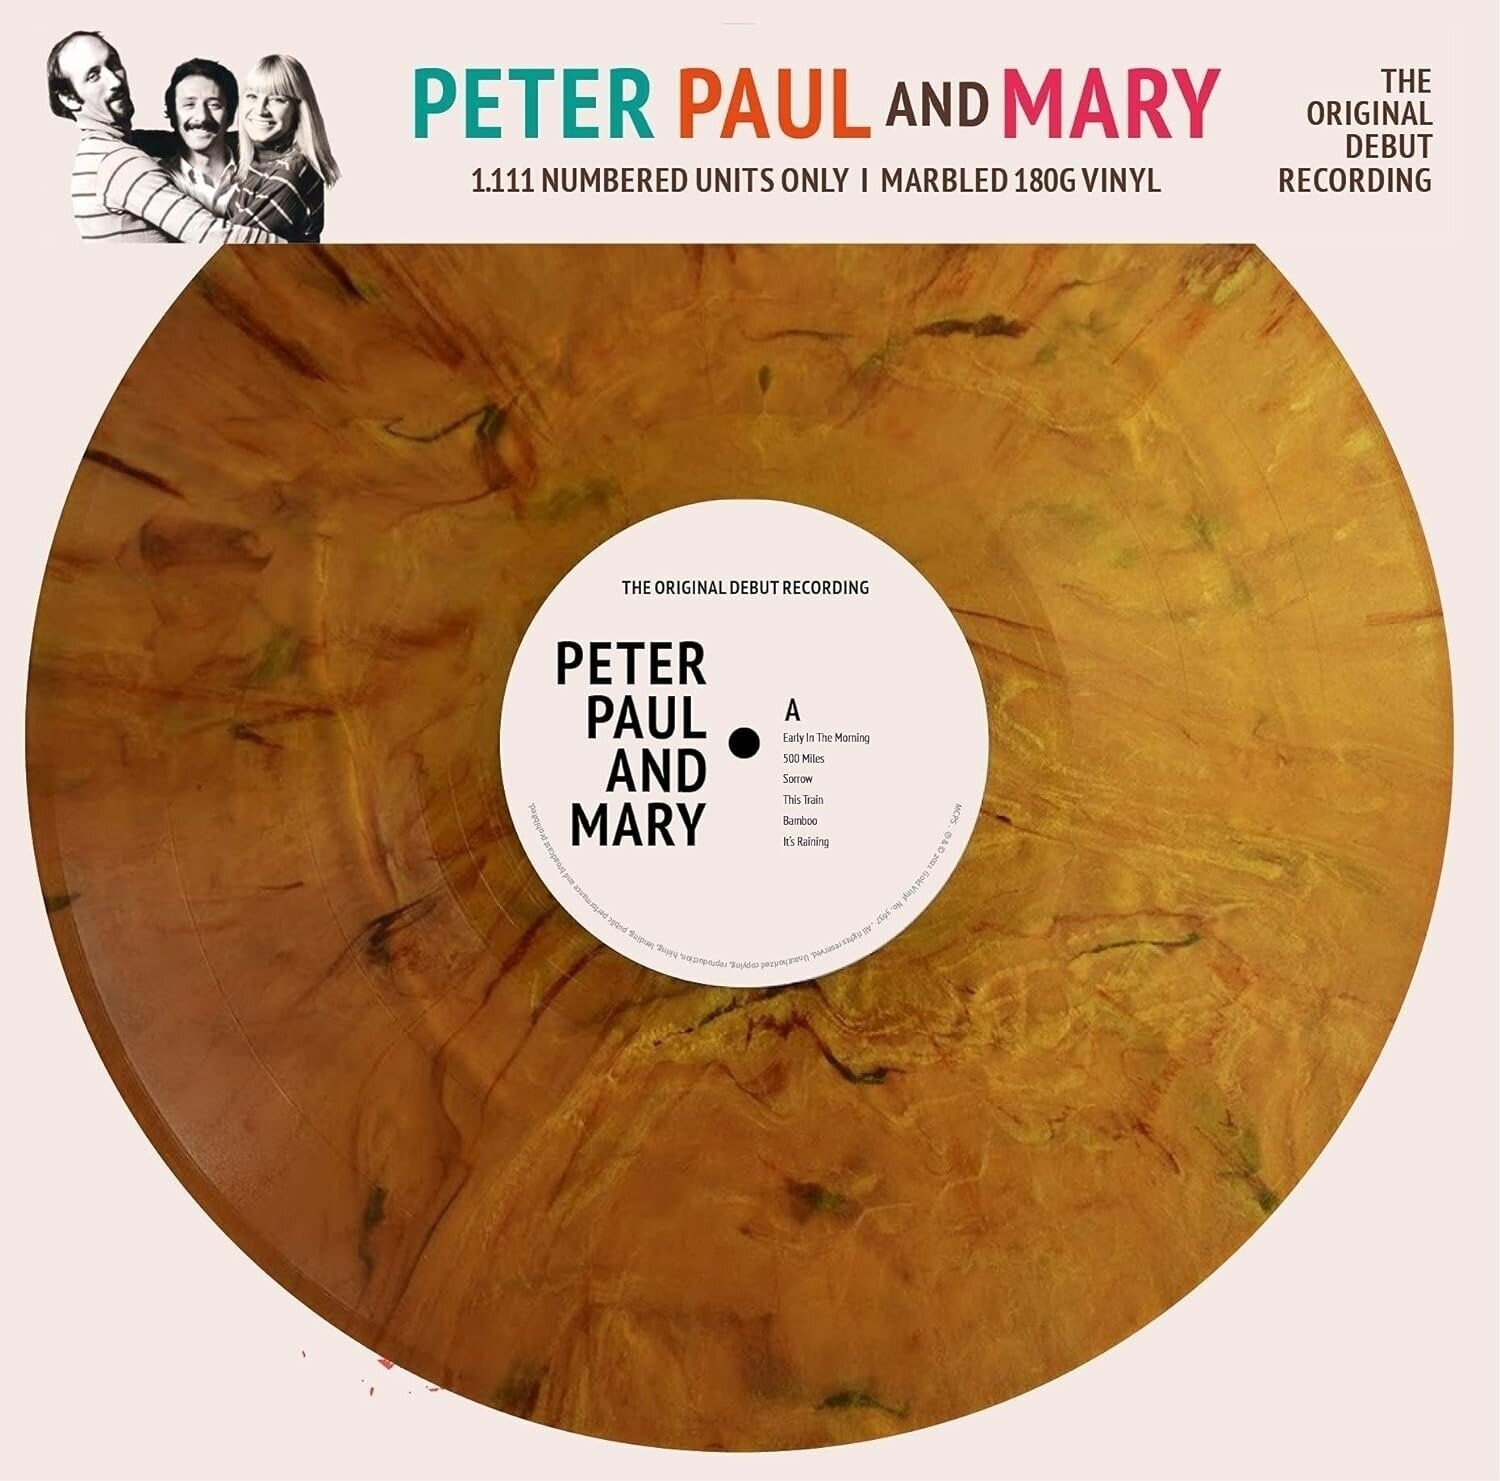 Disque vinyle Peter, Paul and Mary - The Original Debut Recording (Limited Edition) (Numbered) (Gold Marbled Coloured) (LP)